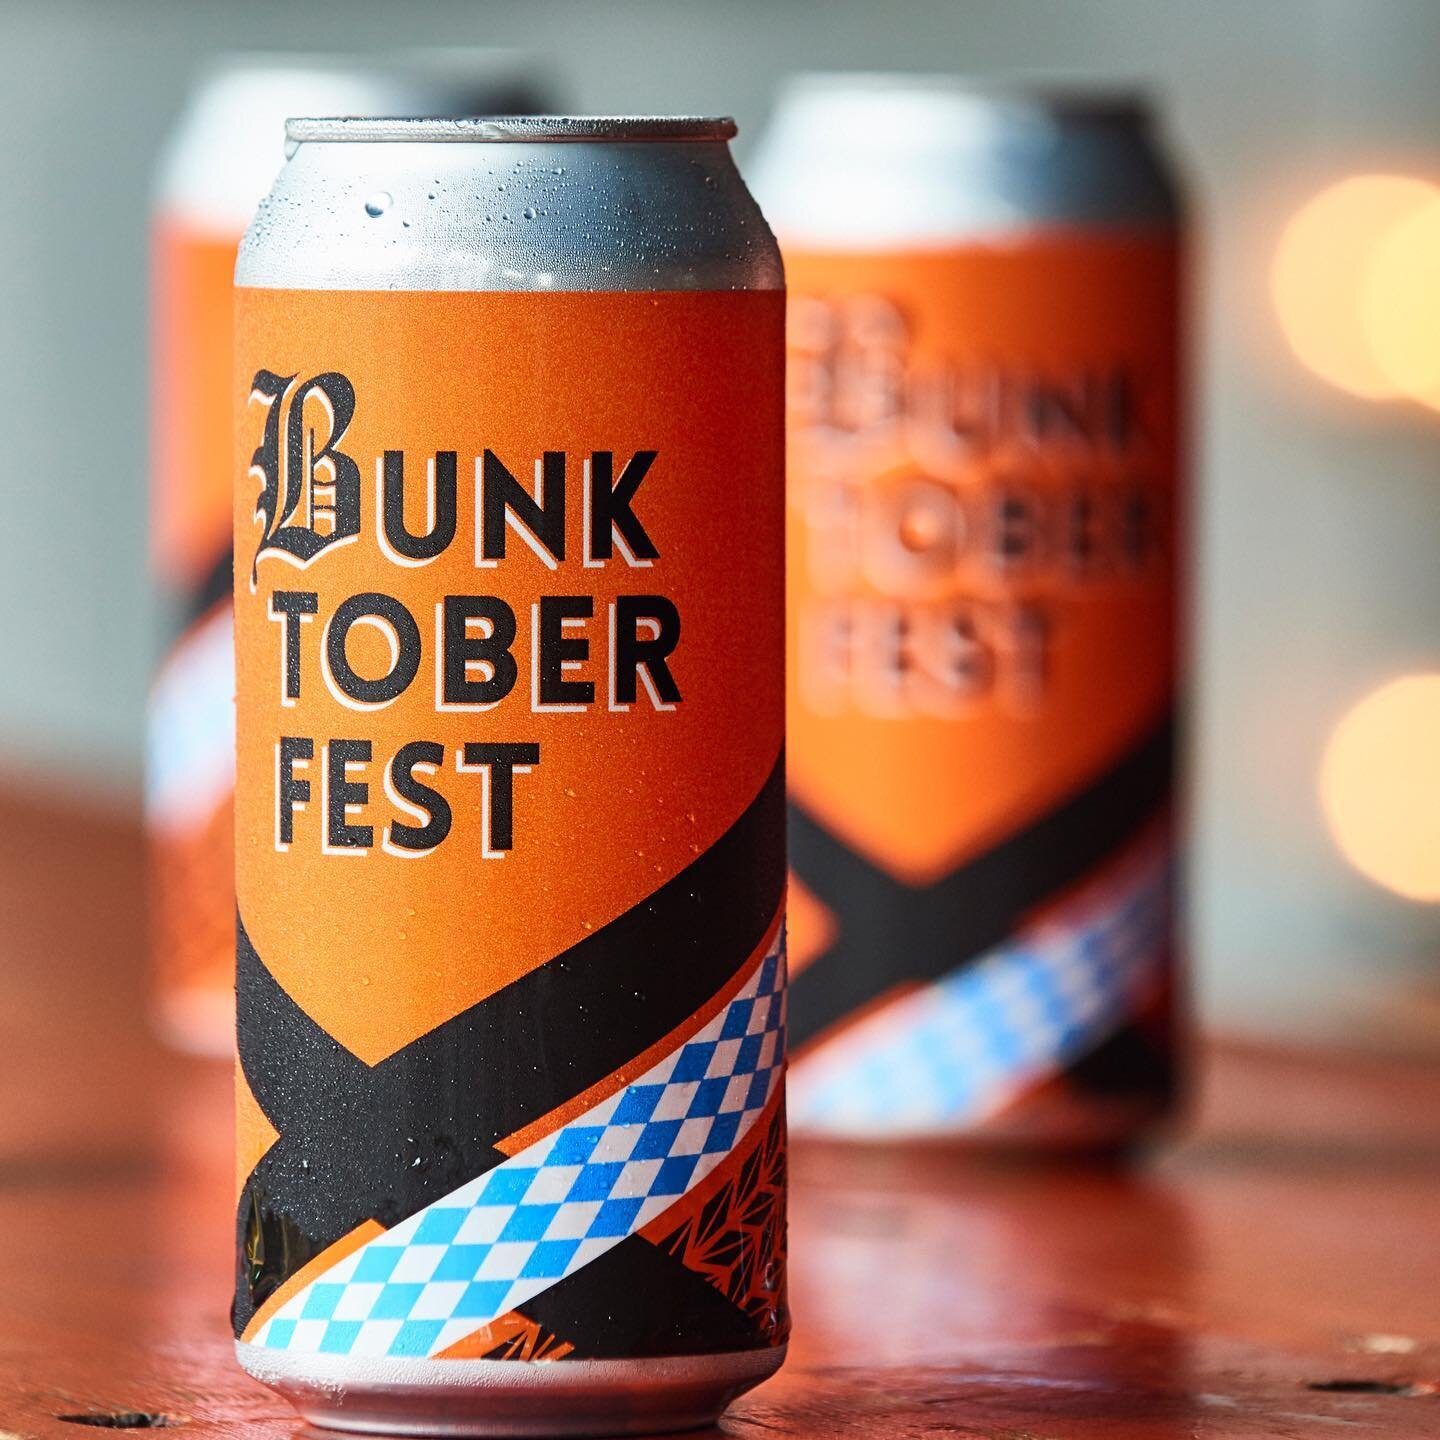 🍁🍁🍁🍁🍁
When the days start getting shorter and you can feel that back-to-school weather creeping into August it can only mean one thing - BUNKTOBERFEST, our seasonal M&auml;rzen, is ready to flow in all of its malty majesty! 
🍁 
.5L pours &amp; 